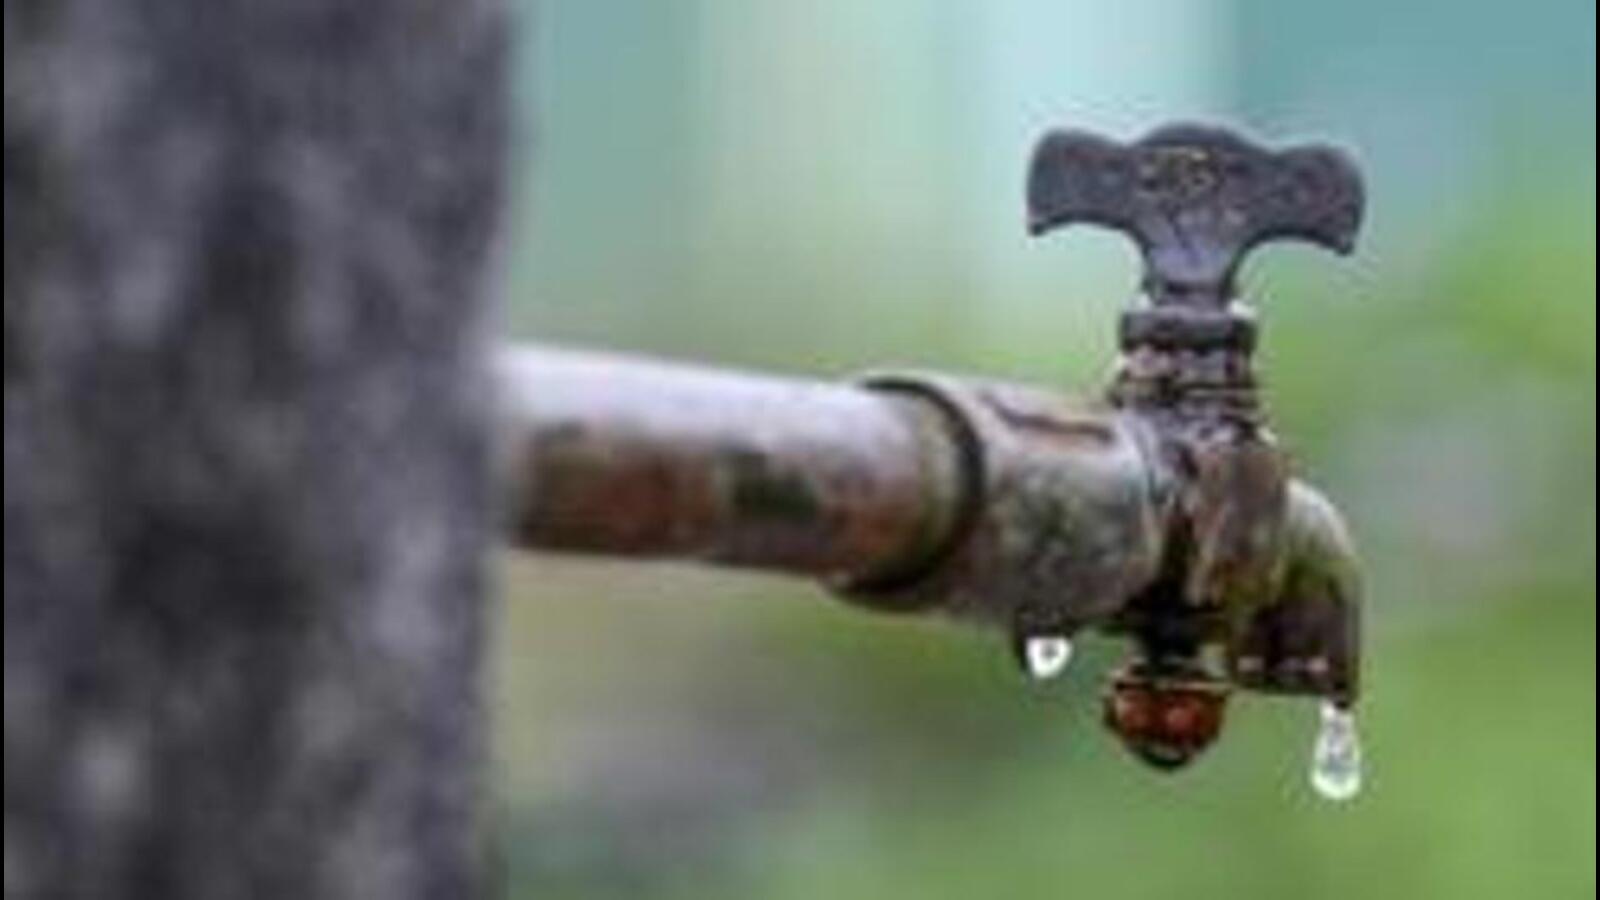 Alternate day water supply irks Pune residents - Hindustan Times